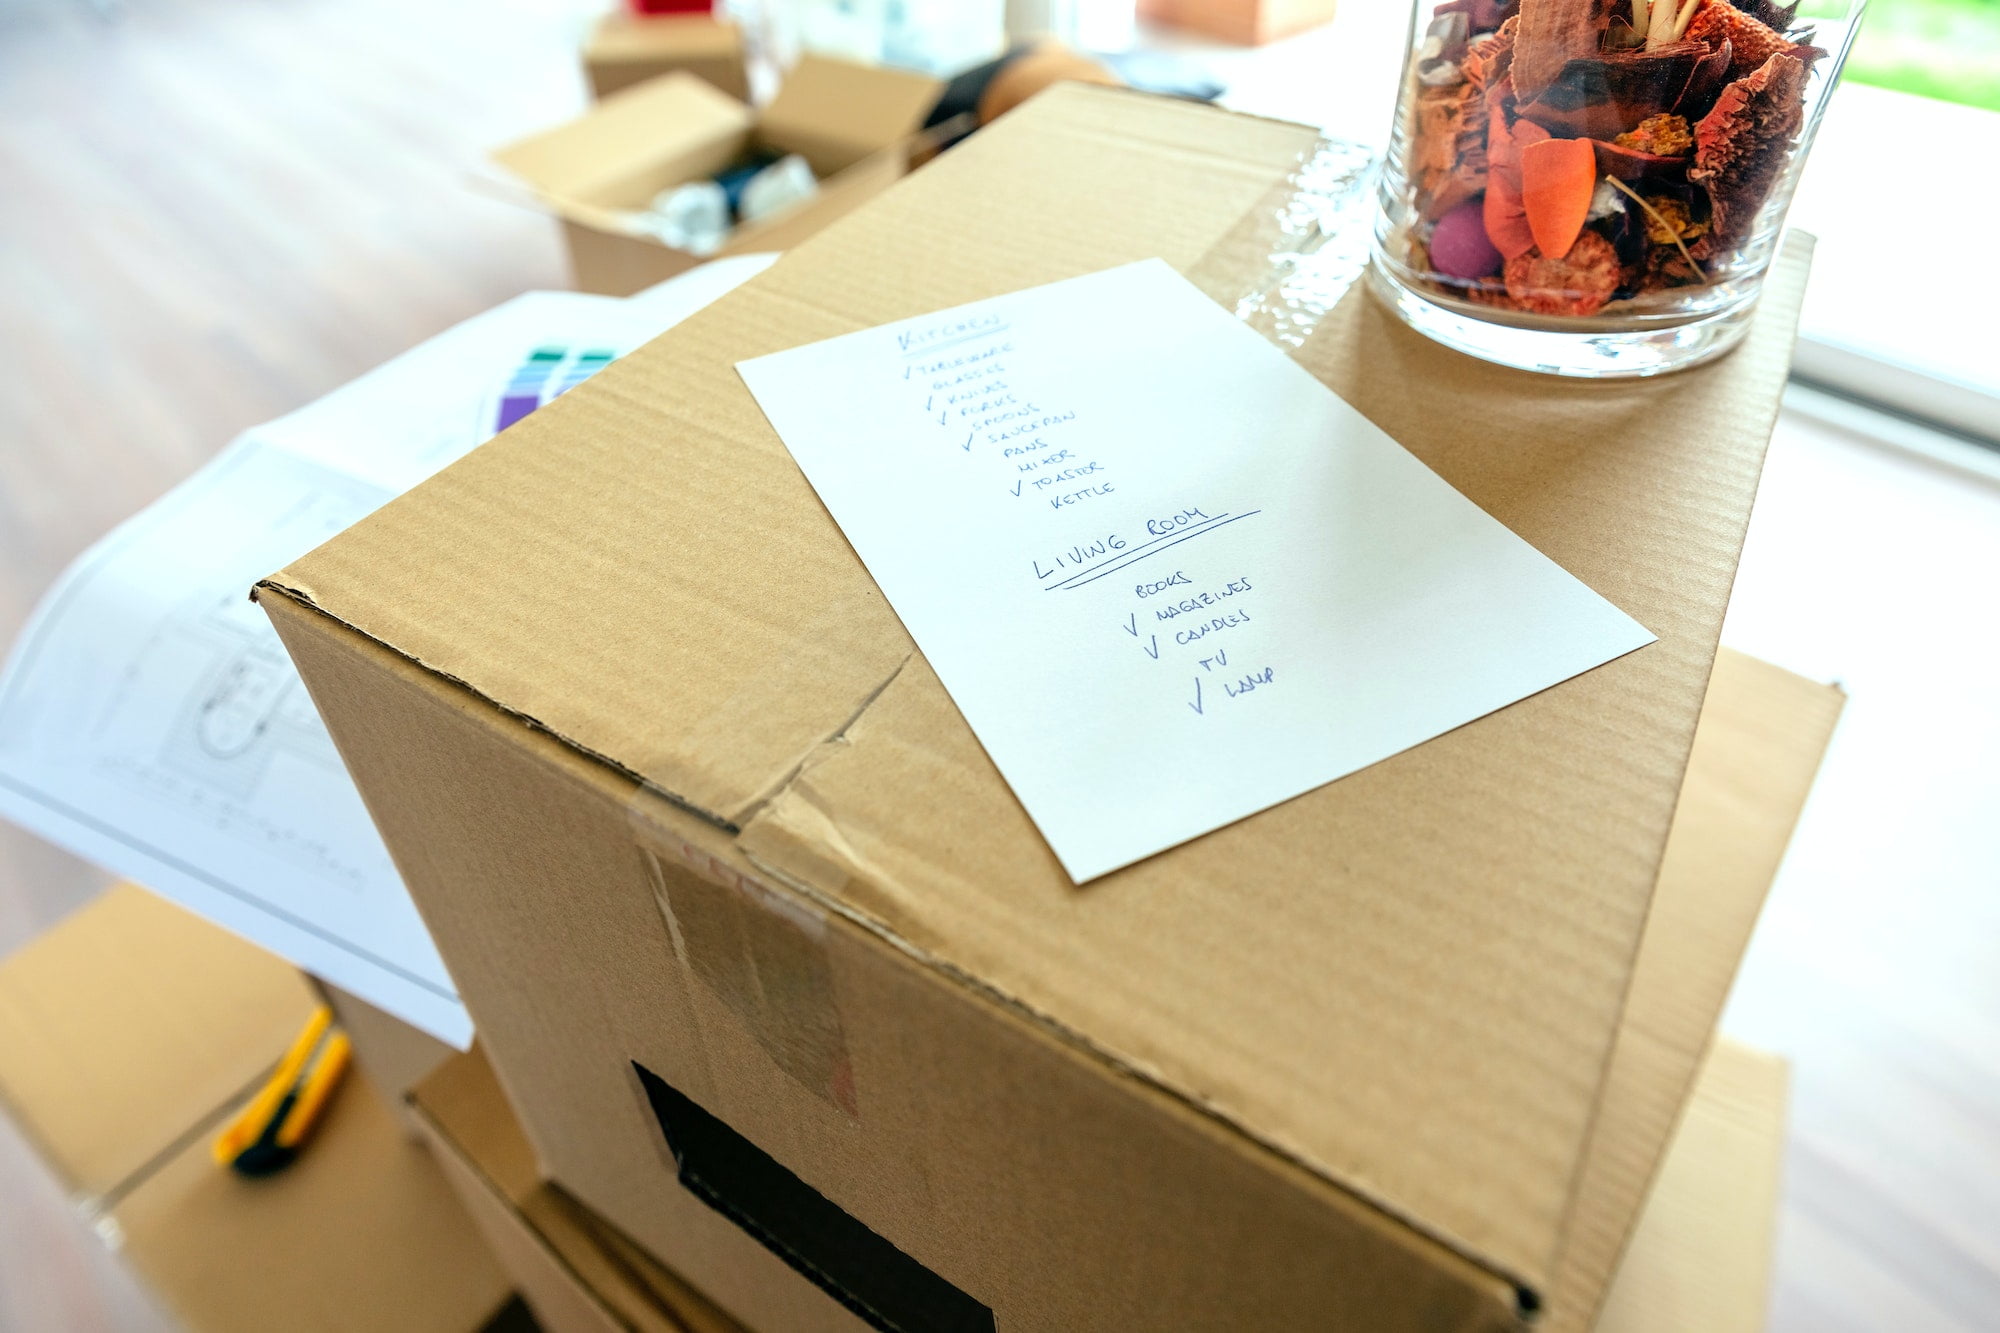 A cardboard box with a note on it sitting in a room.